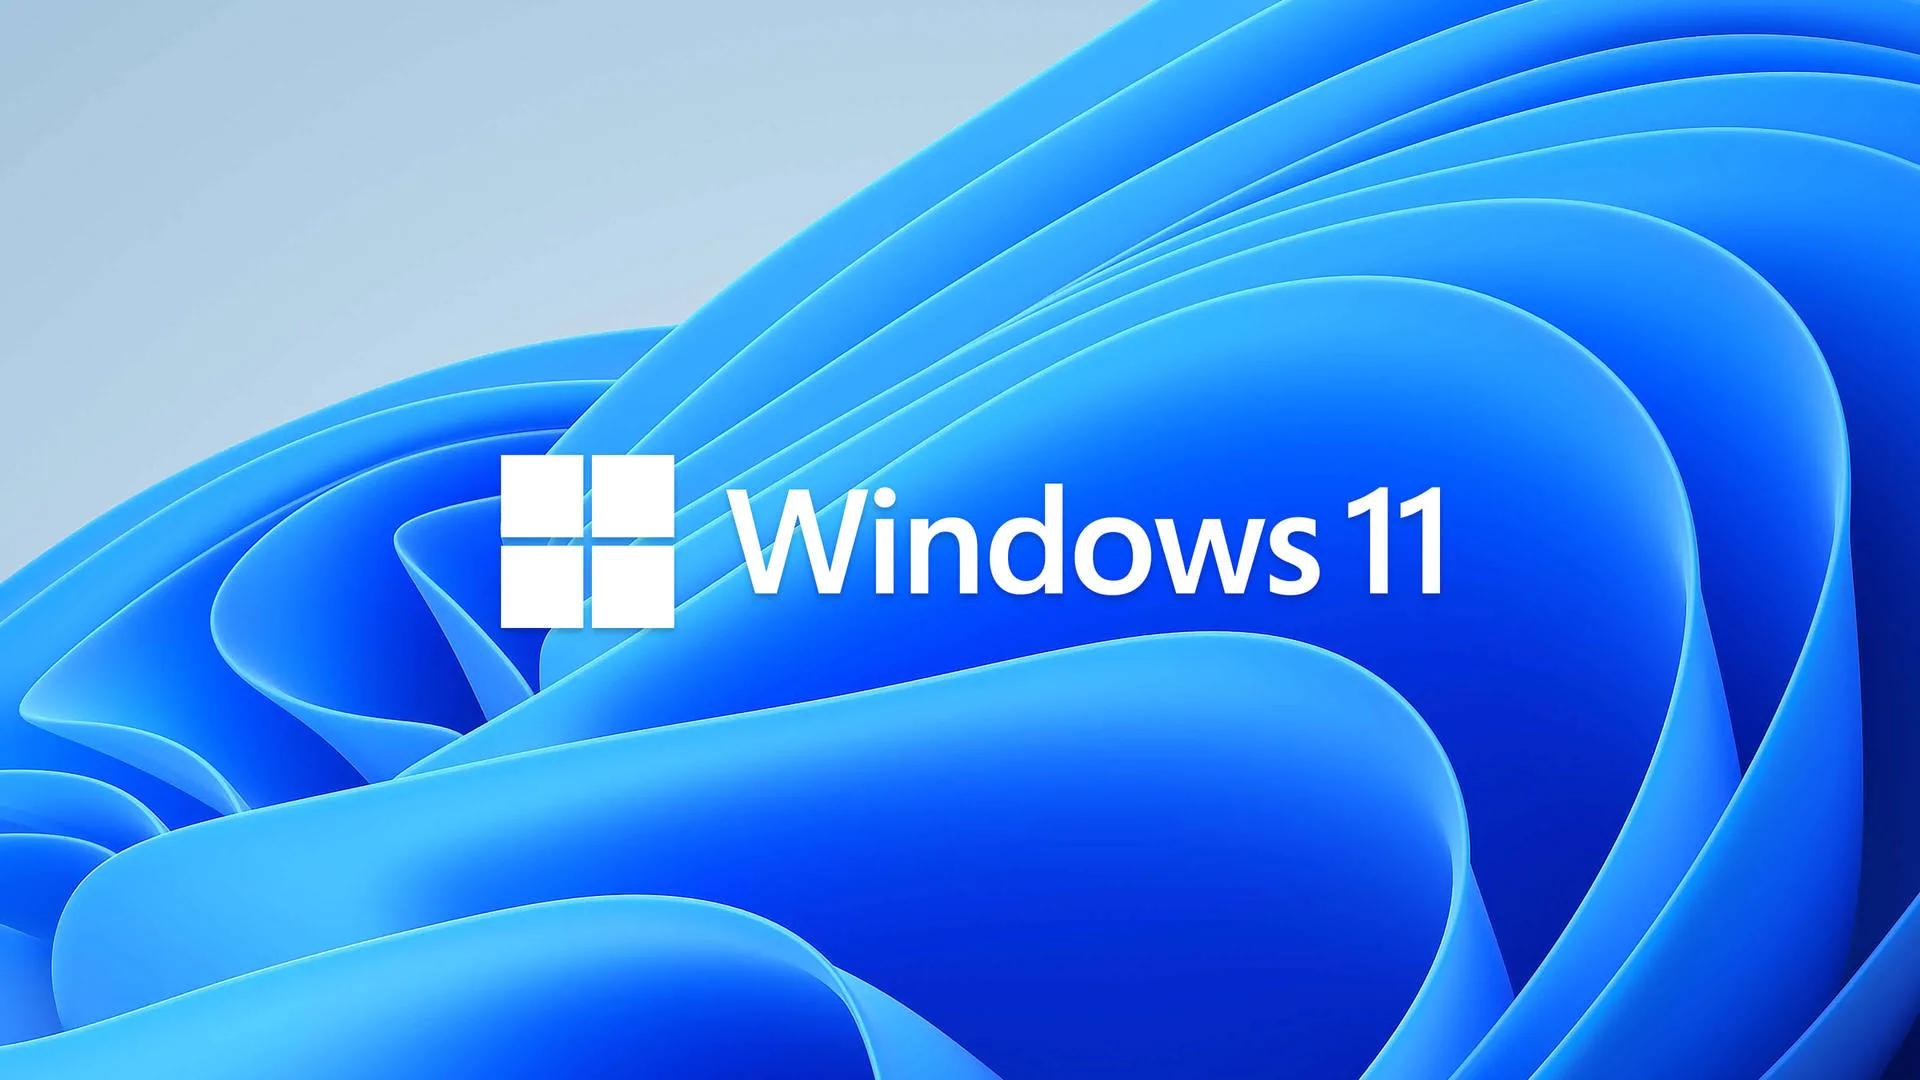 Windows 11 Users Report Slow Boot Issues After Update